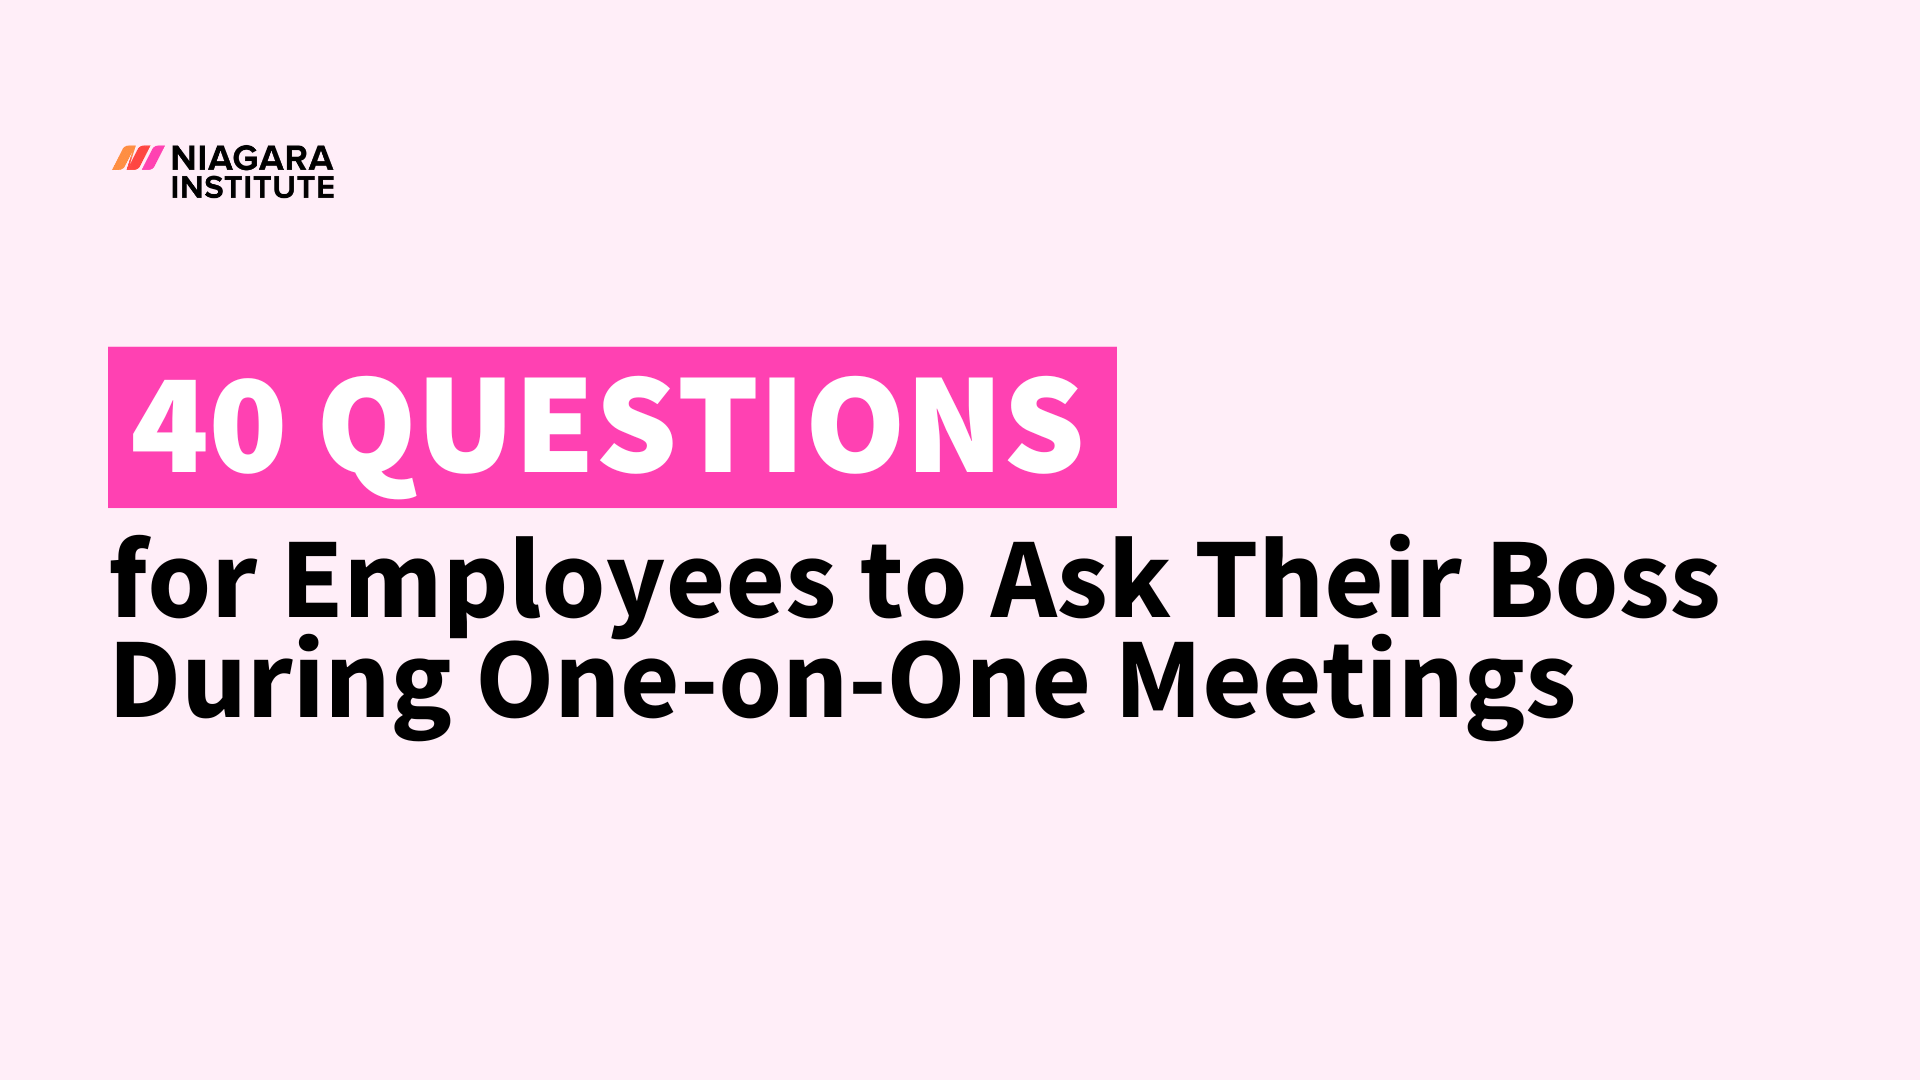 40 One-On-One Meeting Questions for Employees to Ask Their Boss